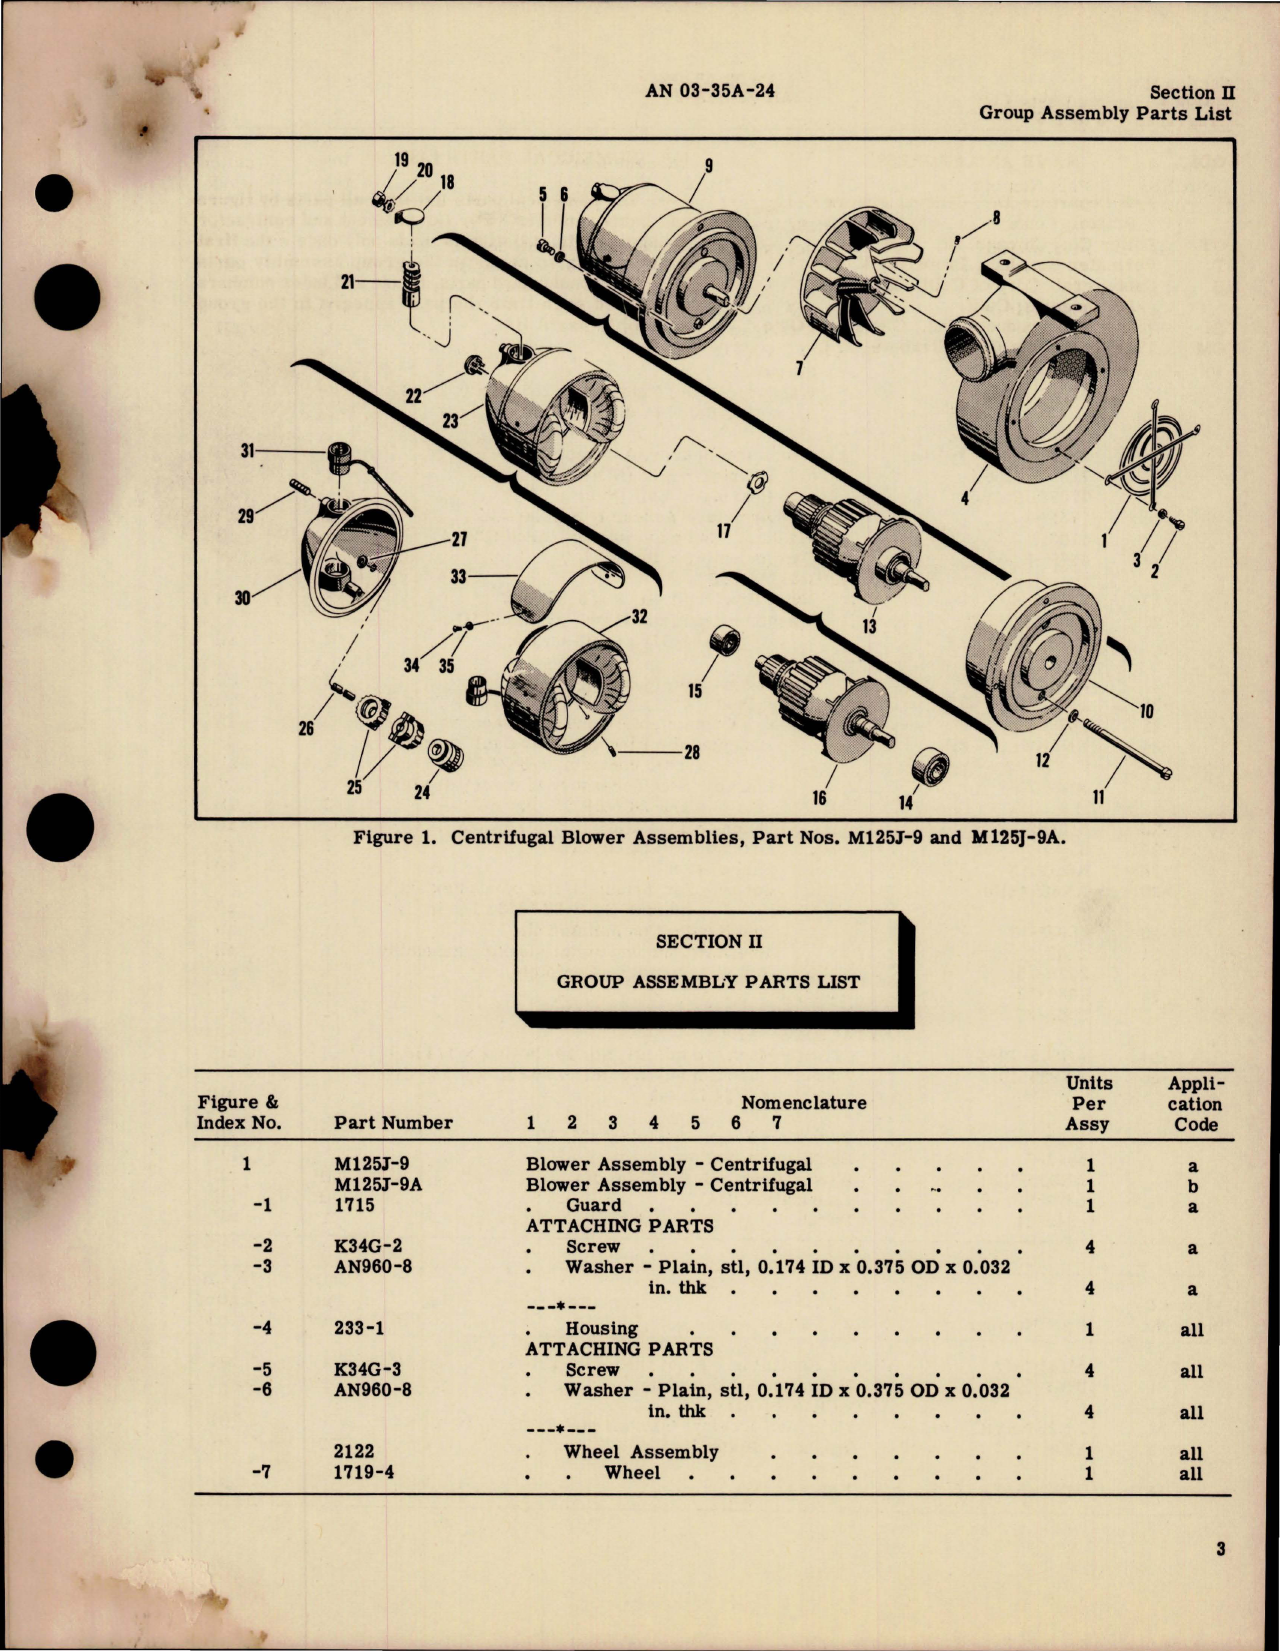 Sample page 5 from AirCorps Library document: Parts Catalog for Blower Assemblies 